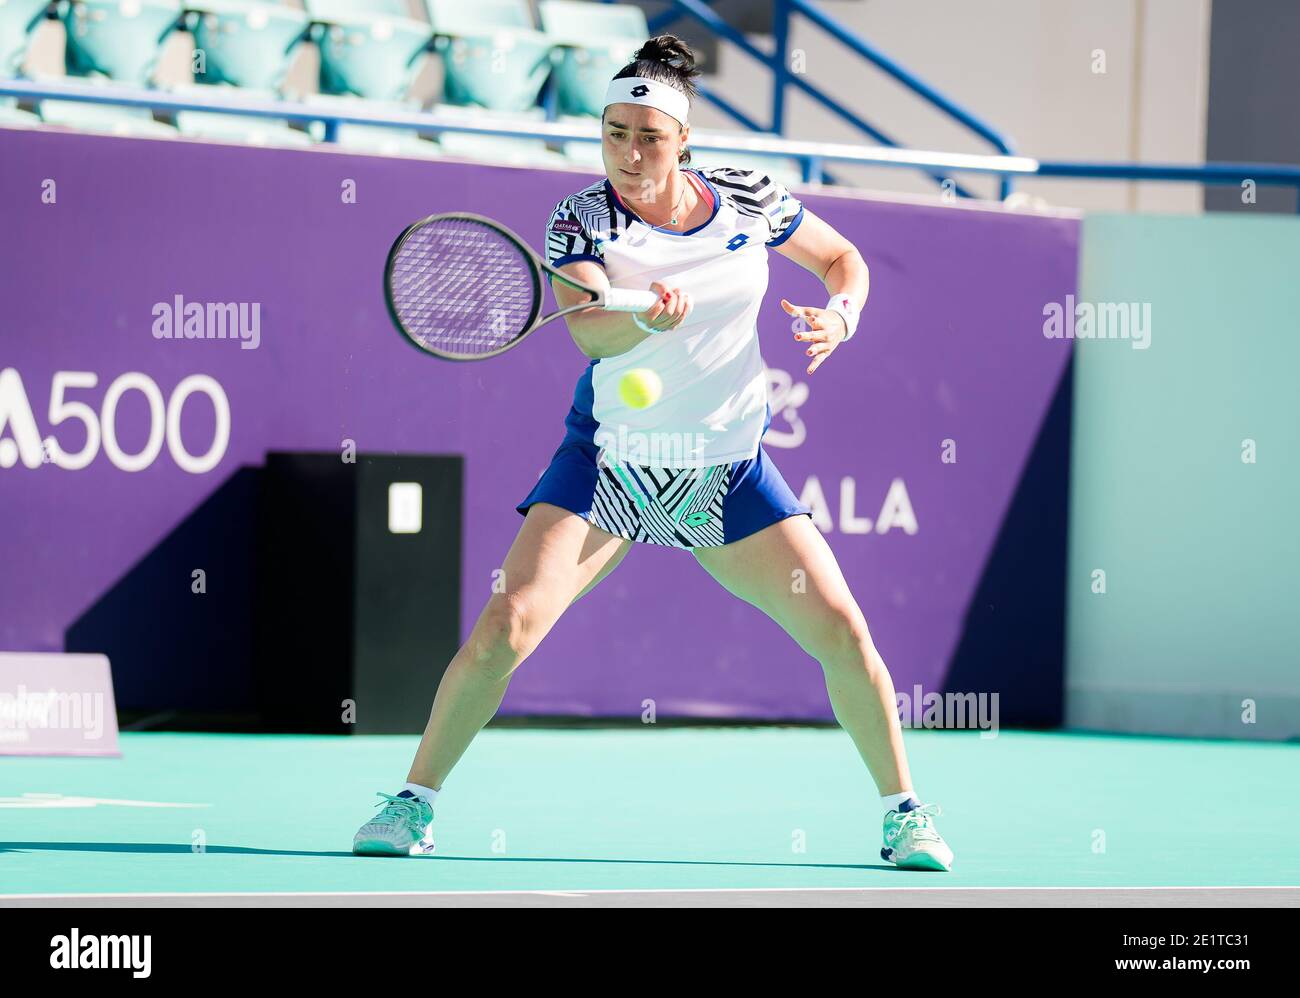 Ons Jabeur of Tunisia in action against Kateryna Bondarenko of the Ukraine during the second round at the 2021 Abu Dhabi WTA Women / LM Stock Photo